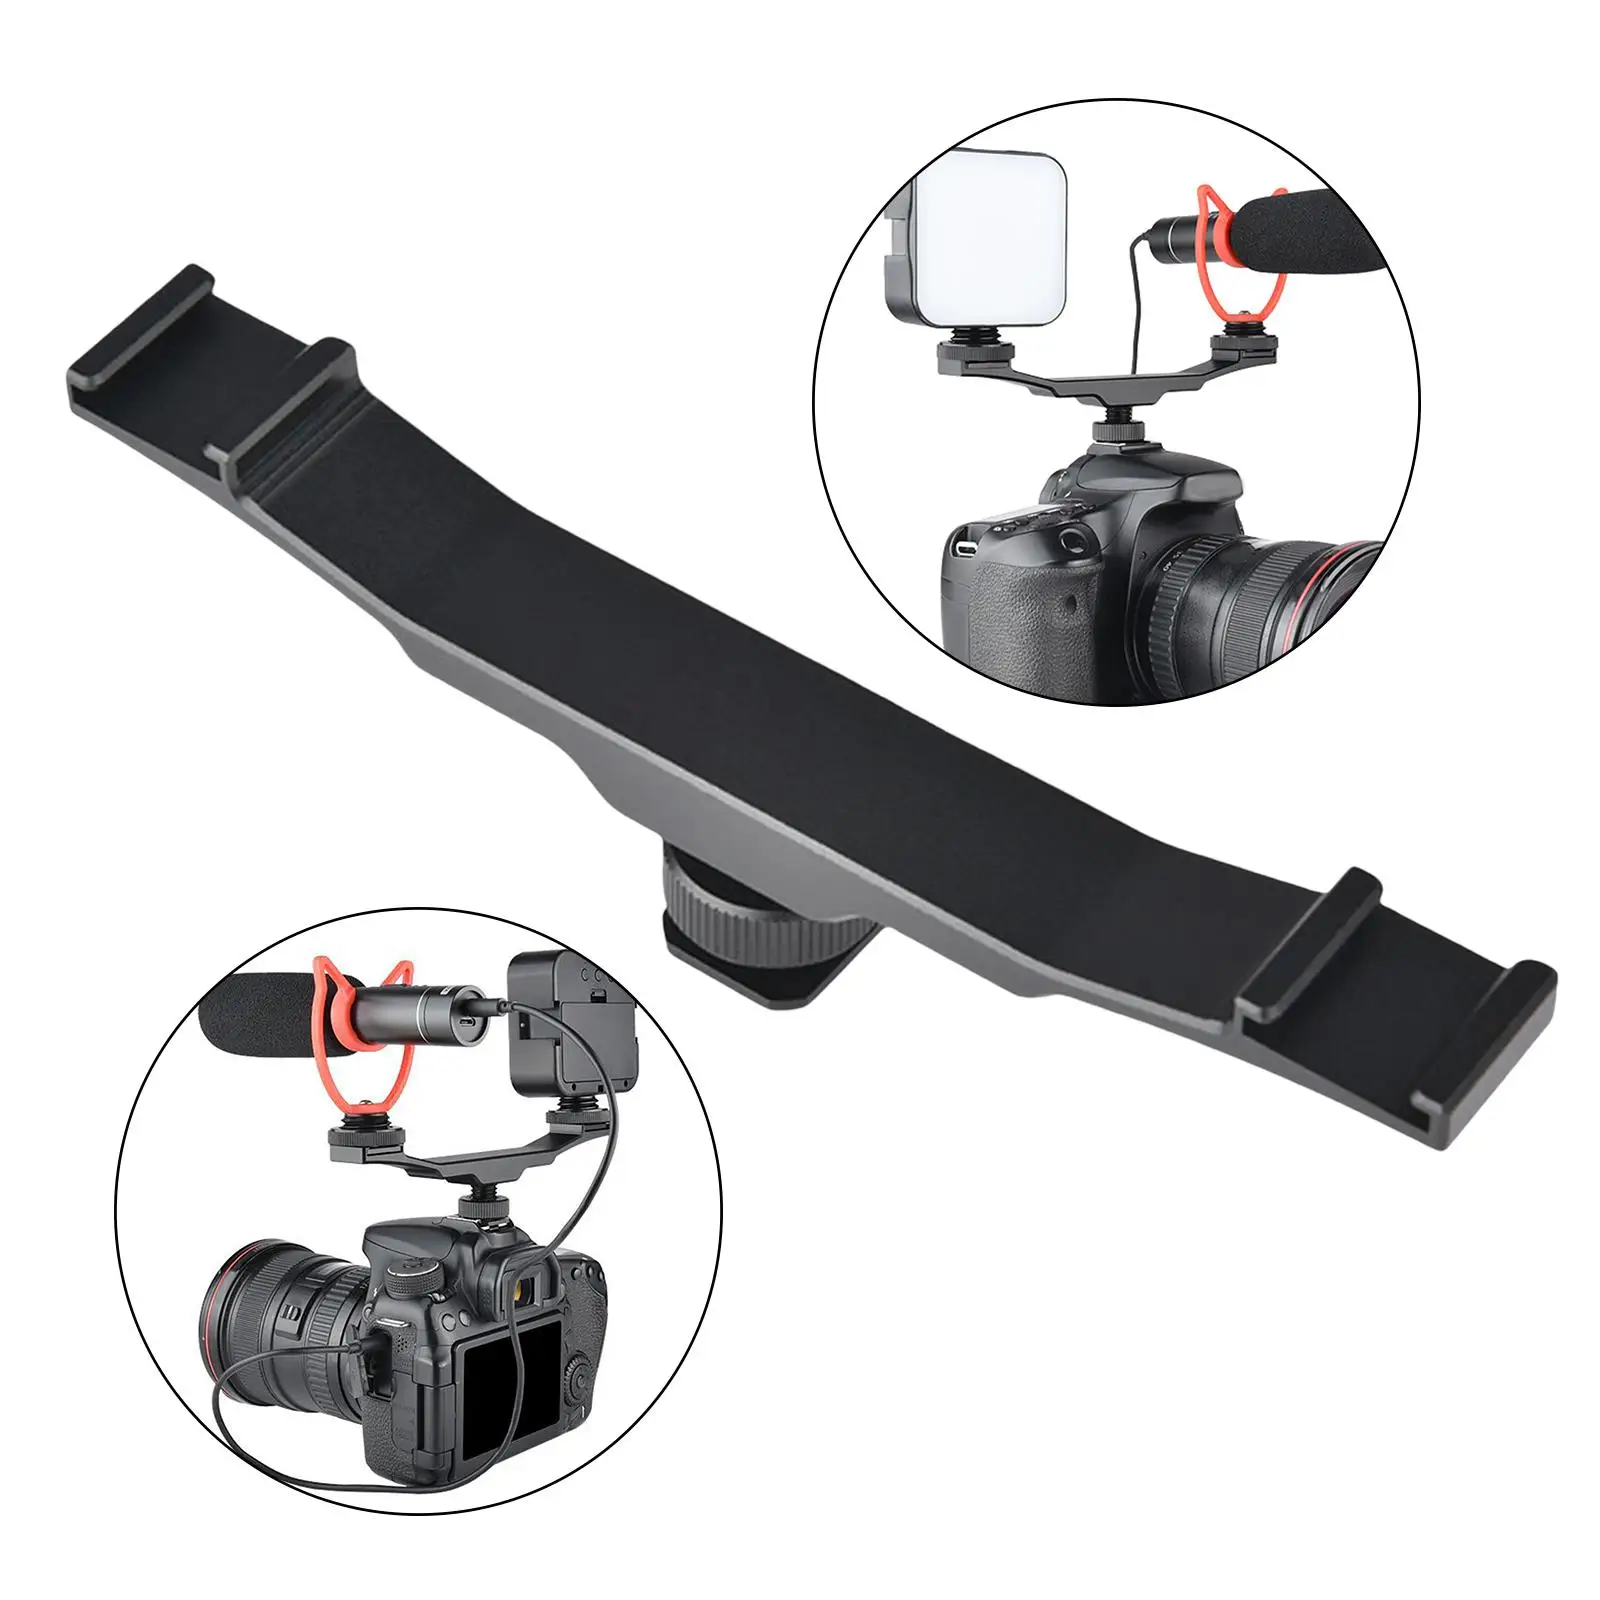 Dual Cold Shoe Mount with Hot Shoe Mount Adapter Extension Rod for Video Light Camera Flash Fill Light